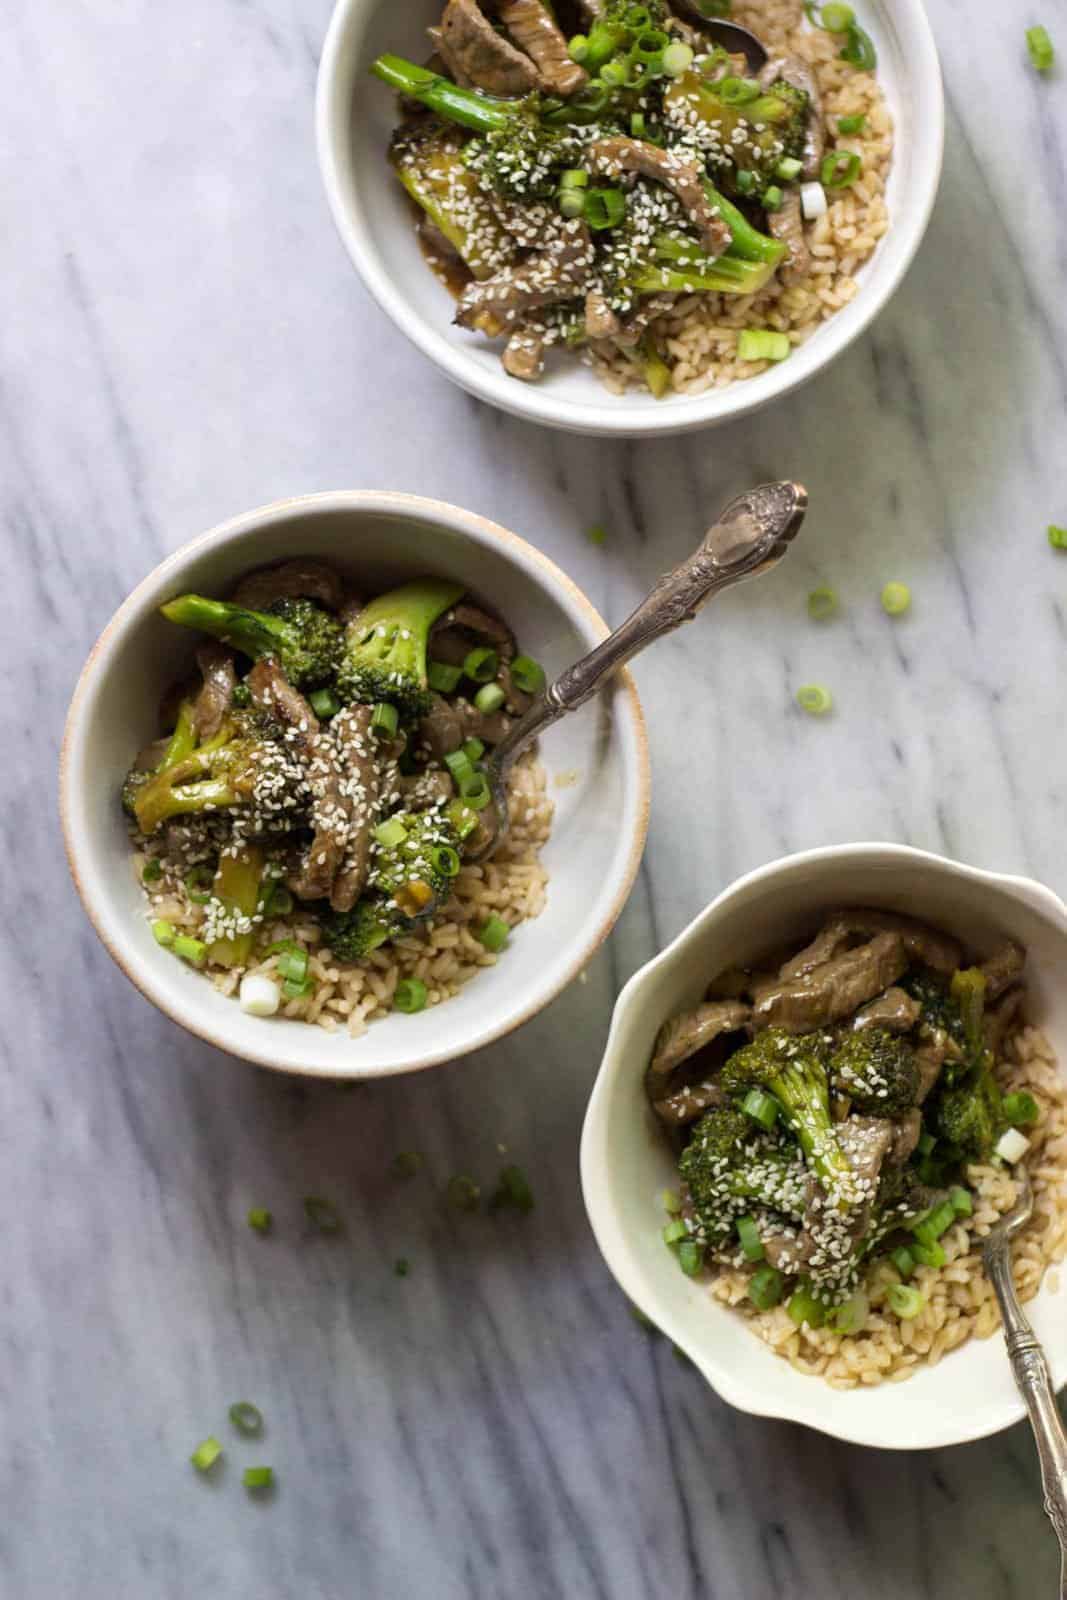 Restaurant-Style Beef & Broccoli in bowls.